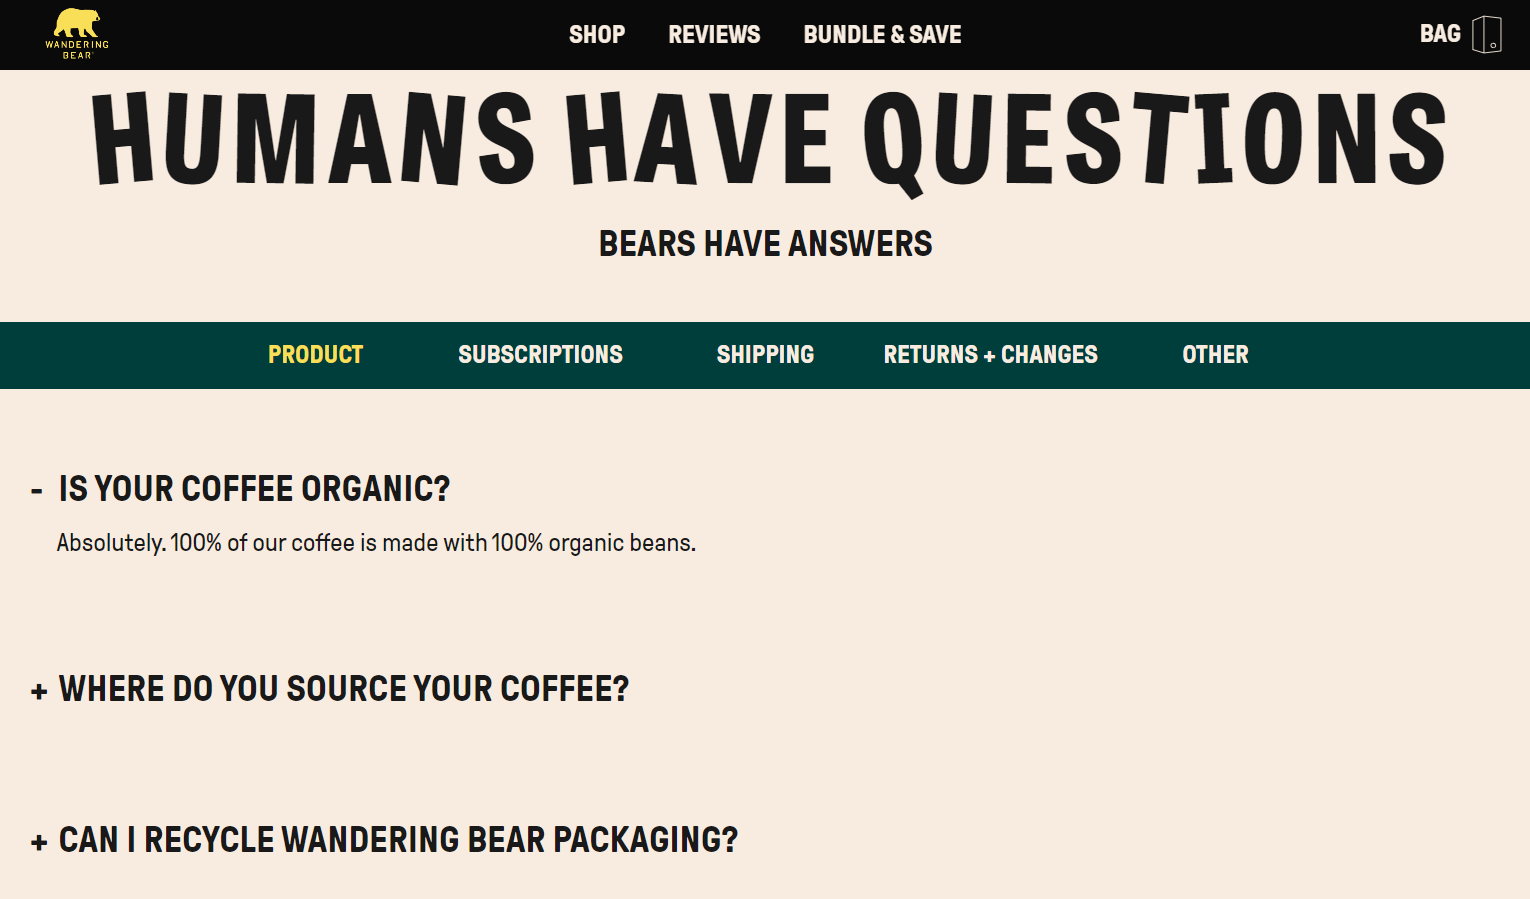 Wandering Bear's FAQ page is distinguished by its relaxed style of communication